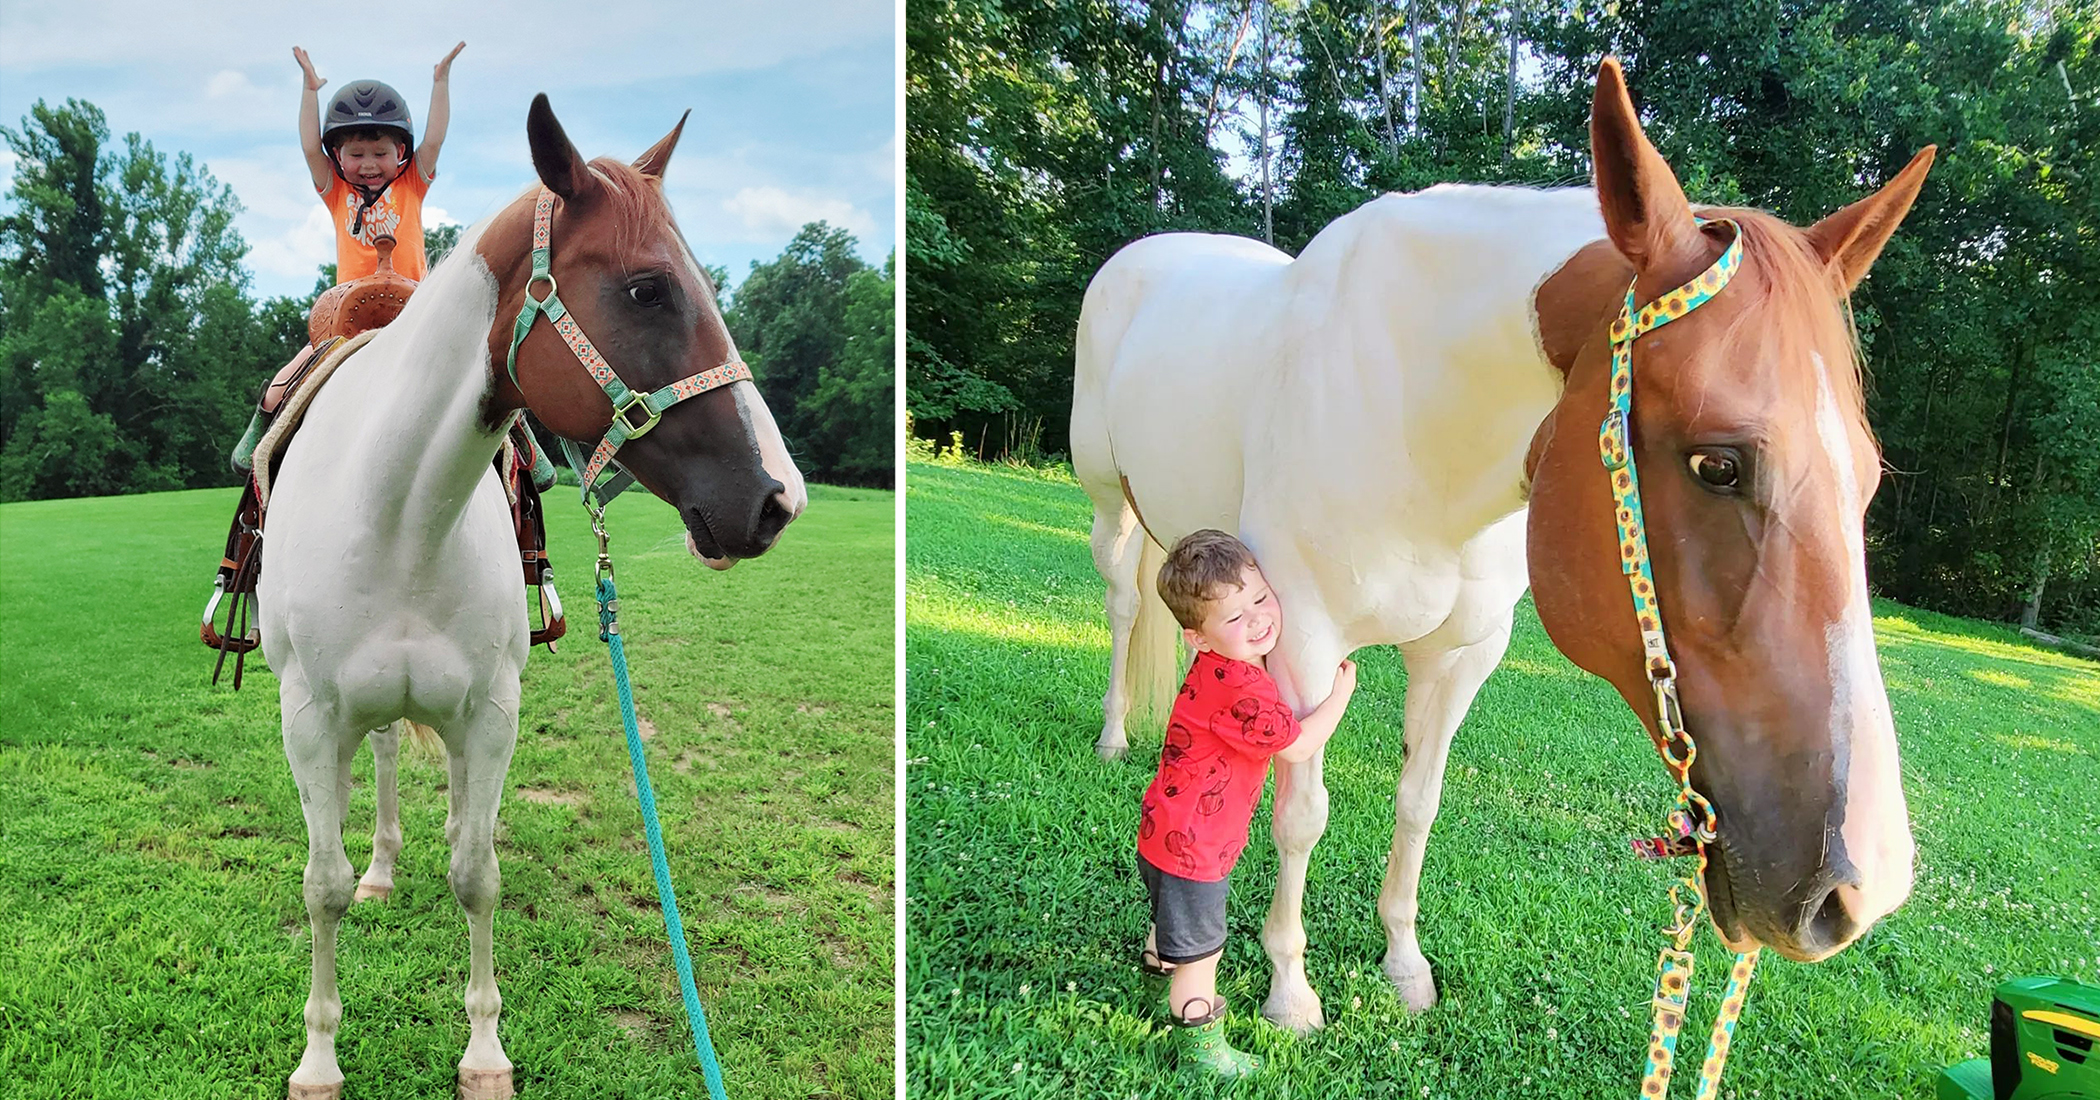 VIDEO: Boy, 3, Shares Special Bond With His Mare, and They Love Exchanging High-Fives